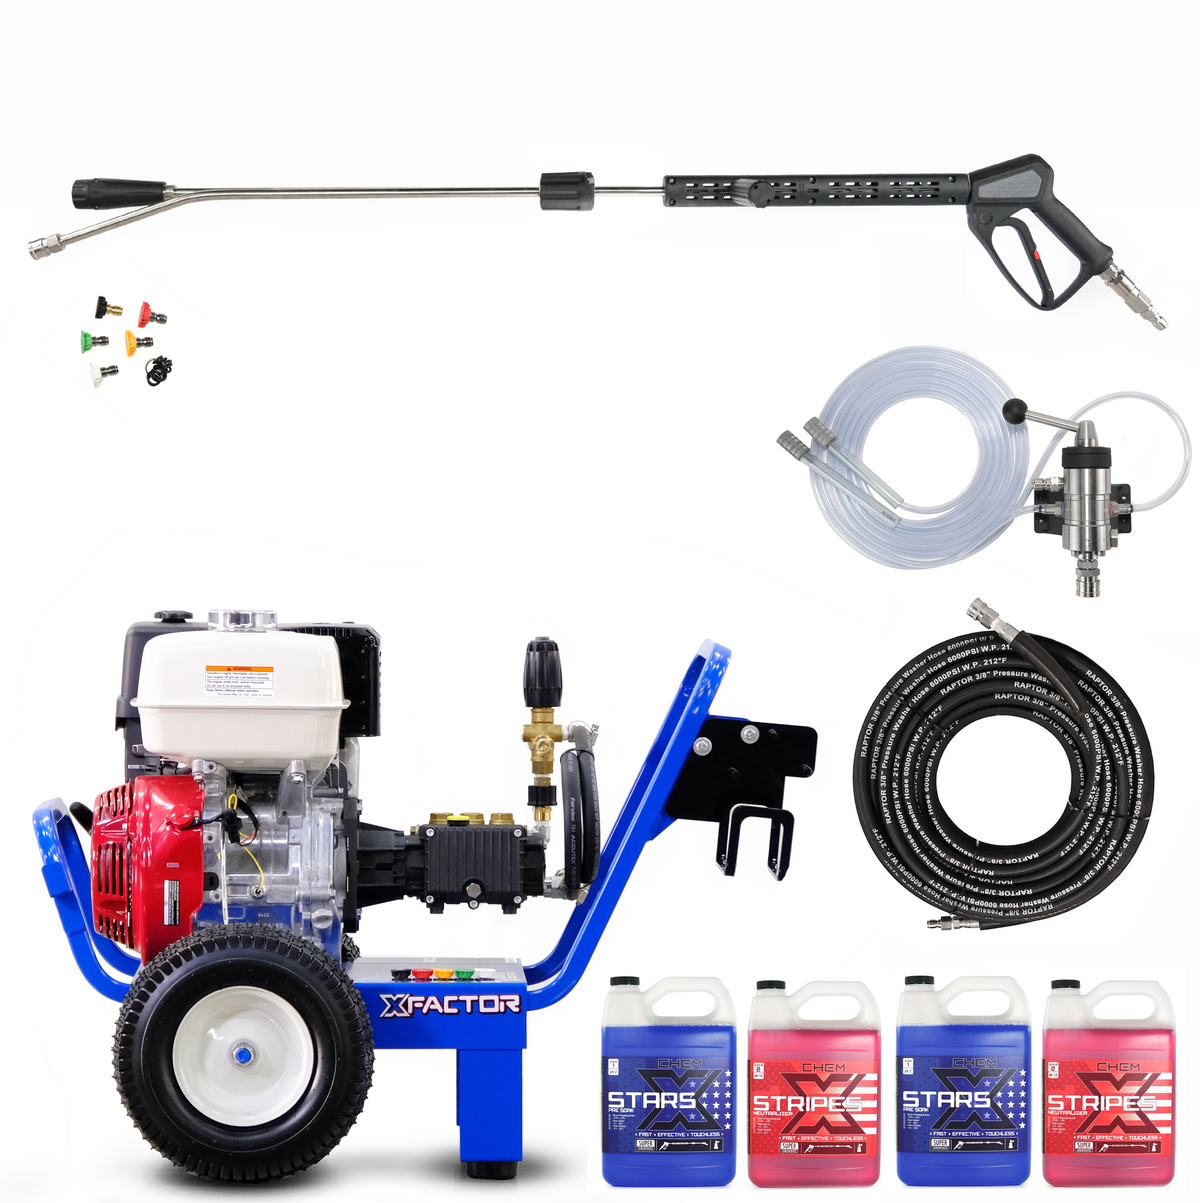 X Factor Portable Gas Power Washer - REAL DEAL TOUCHLESS FOAMING KIT